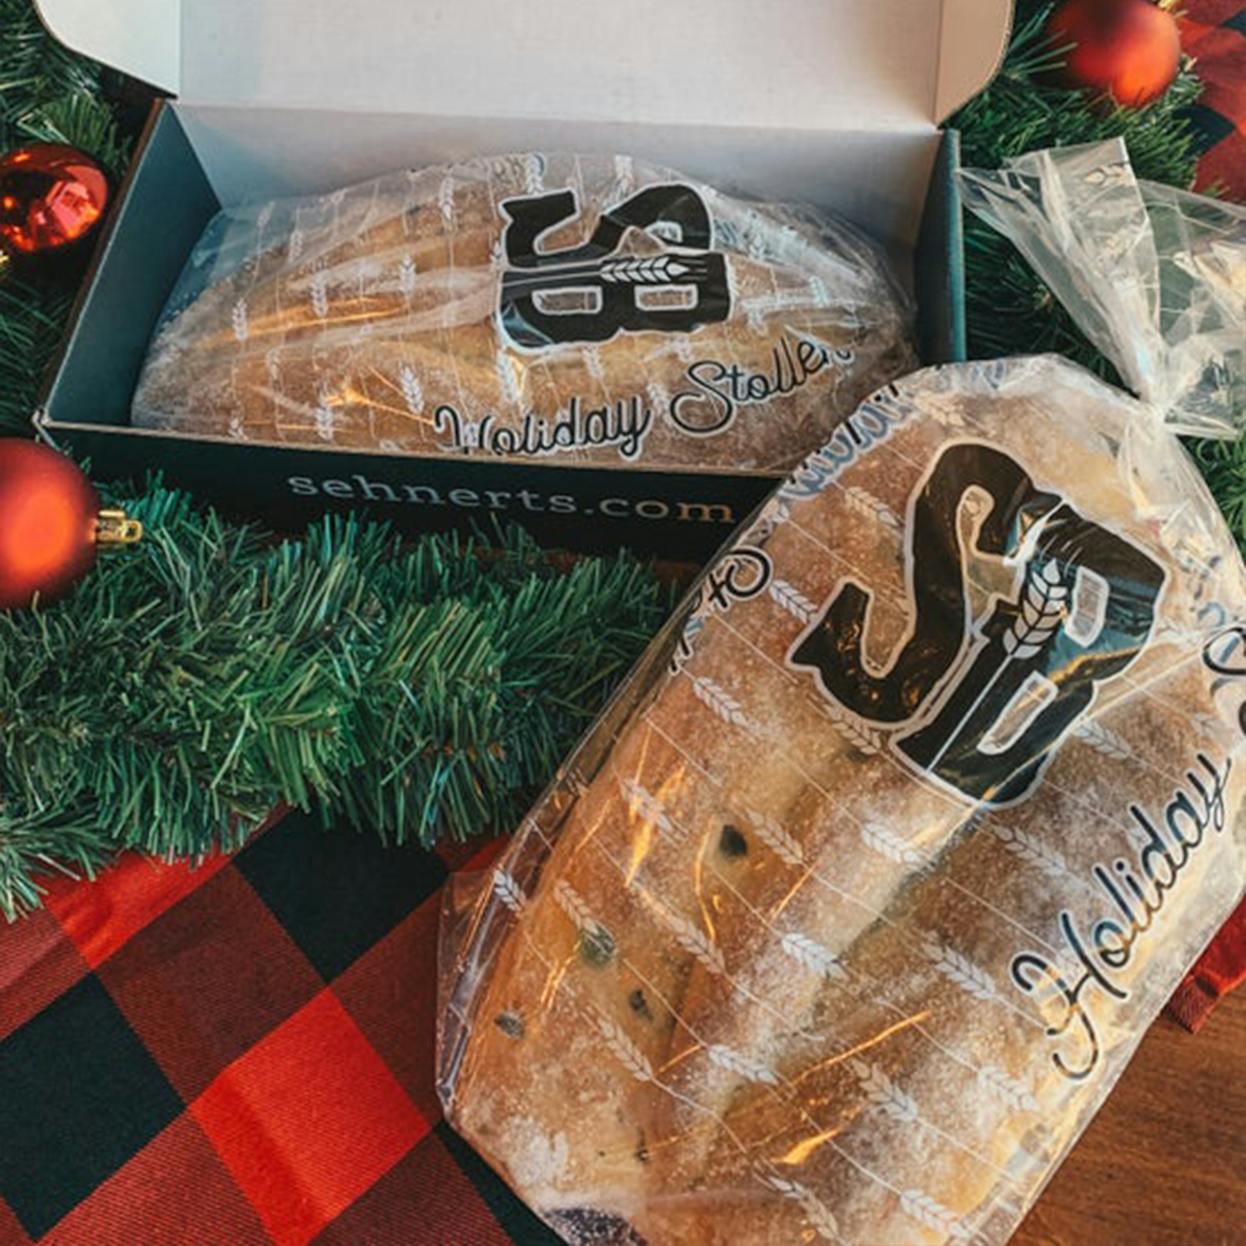 HOLIDAY STOLLEN BREAD From Sehnert's Bakery